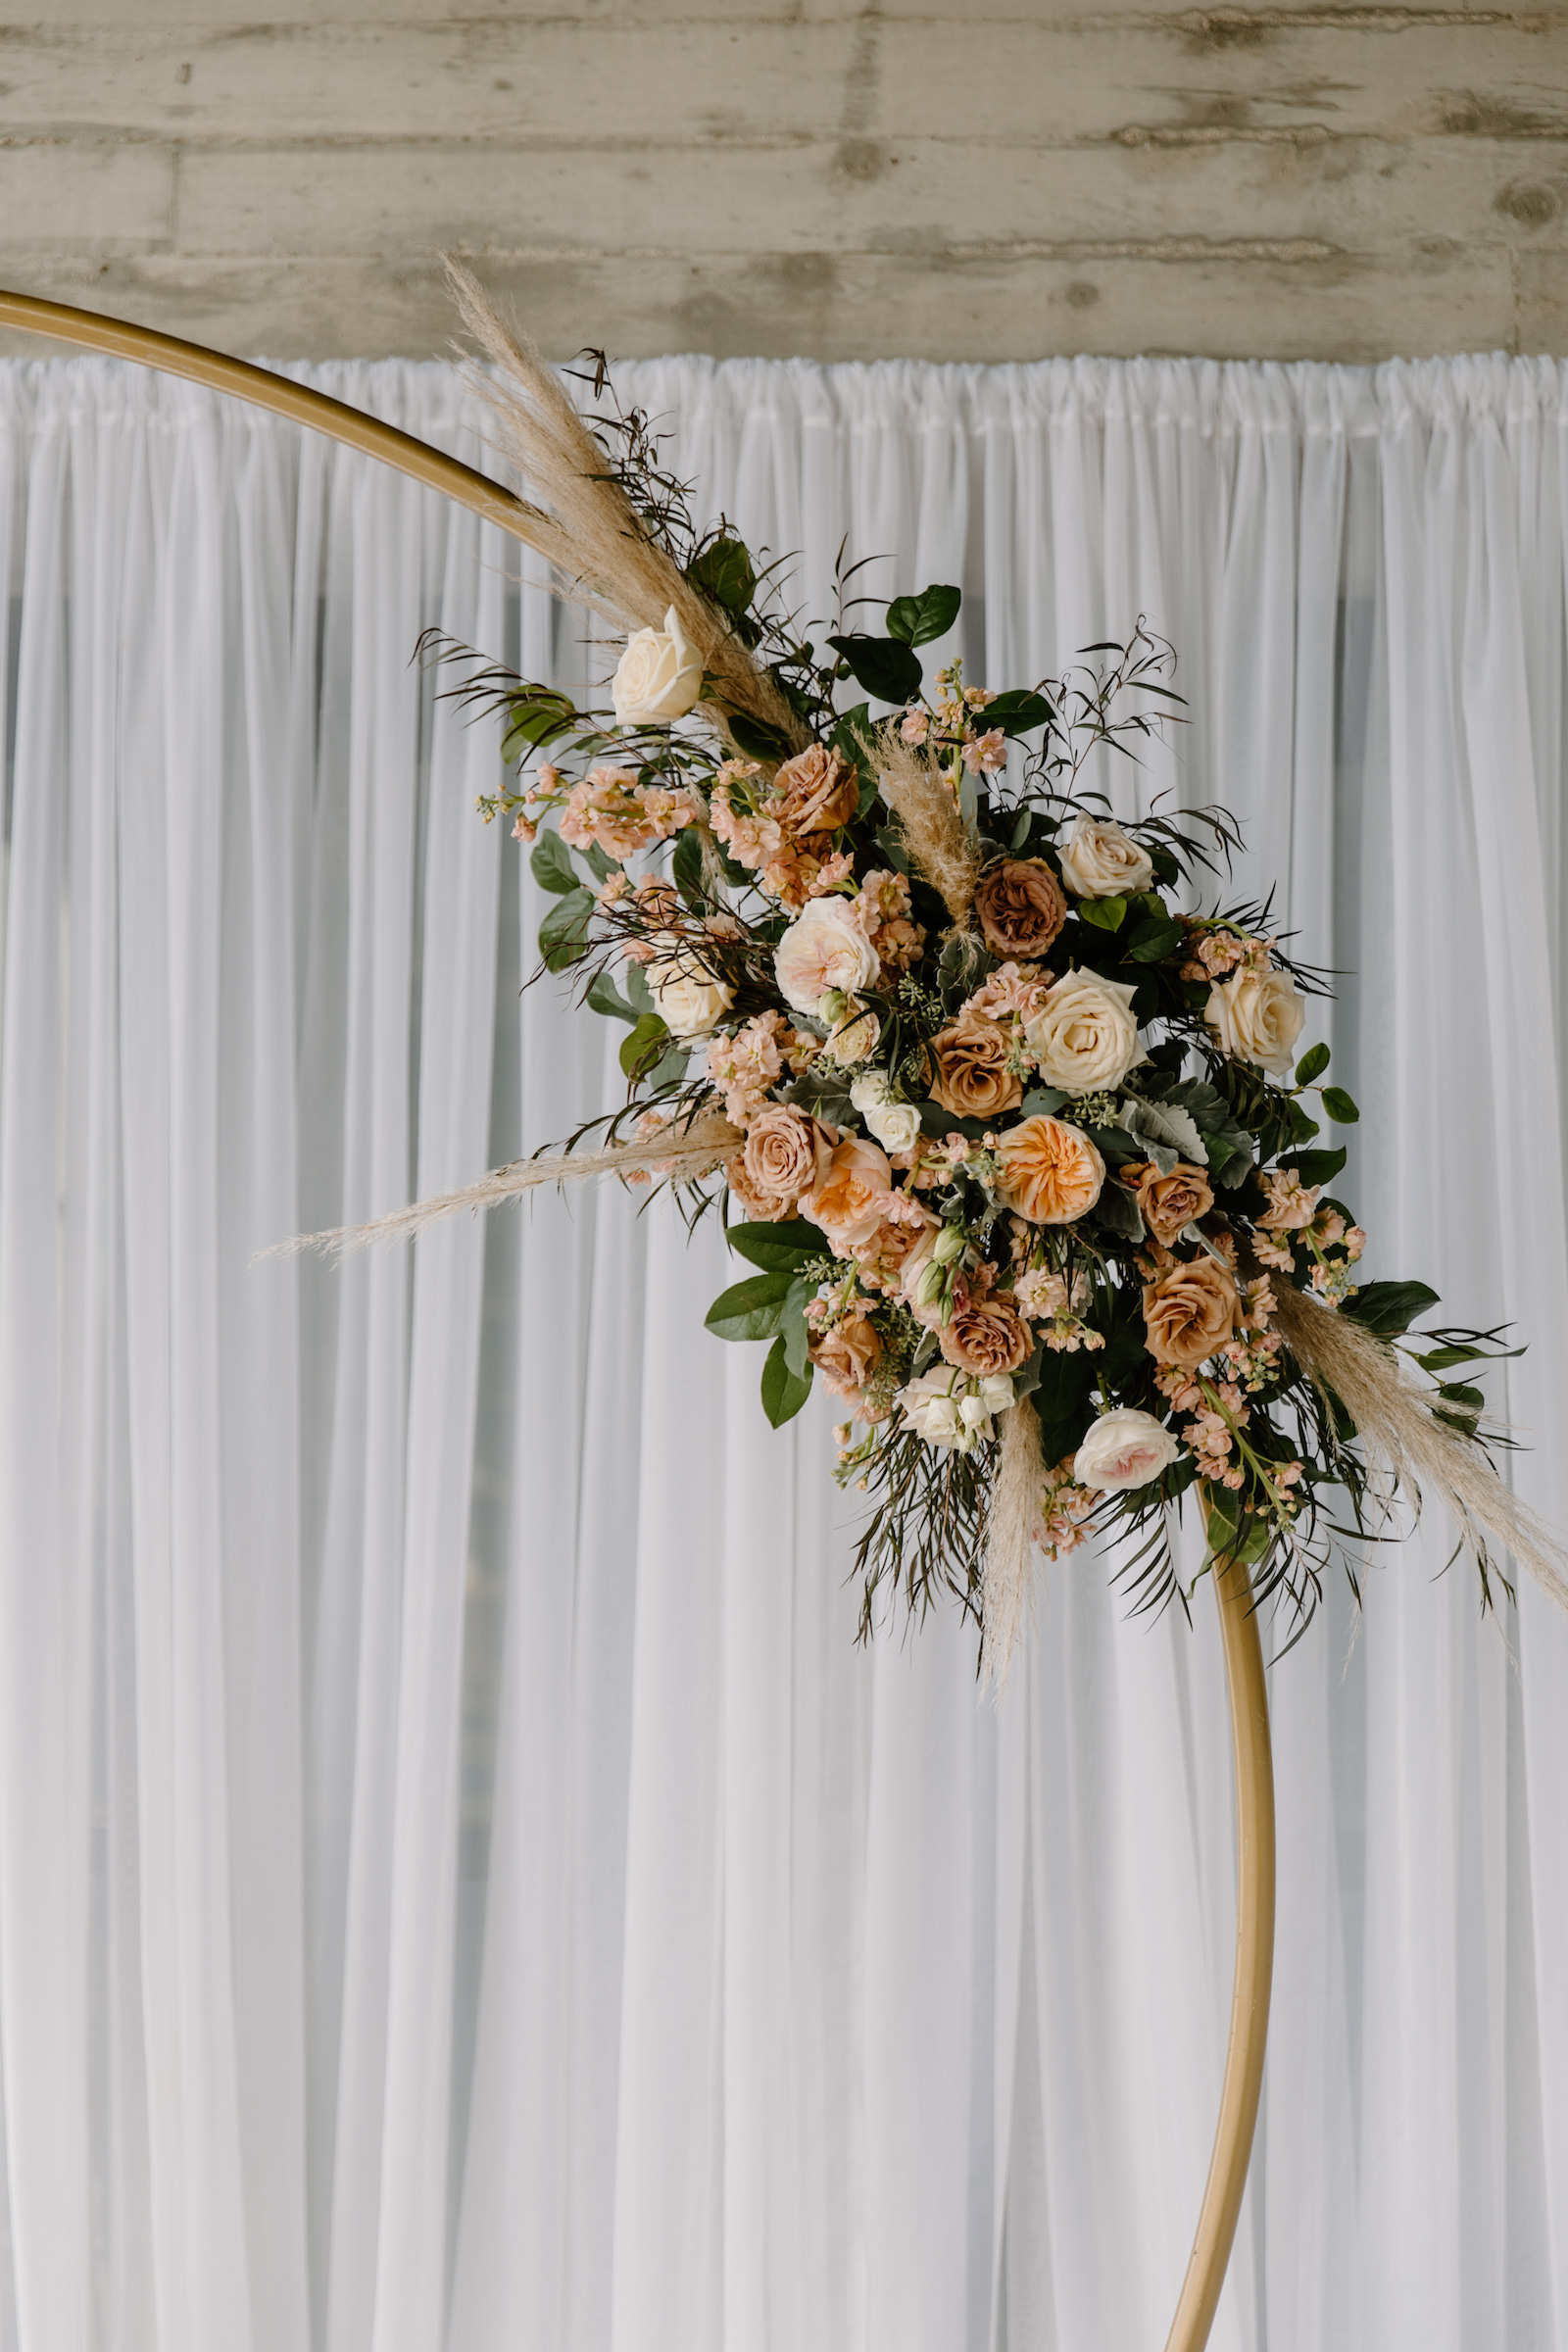 Modern Boho Wedding Ceremony Decor, Gold Metal Circular Arch with Lush Burnt Orange, Ivory and Blush Pink Roses with Pampas Grass and Eucalyptus Greenery Floral Arrangement | Tampa Bay Wedding Florist Iza's Flowers